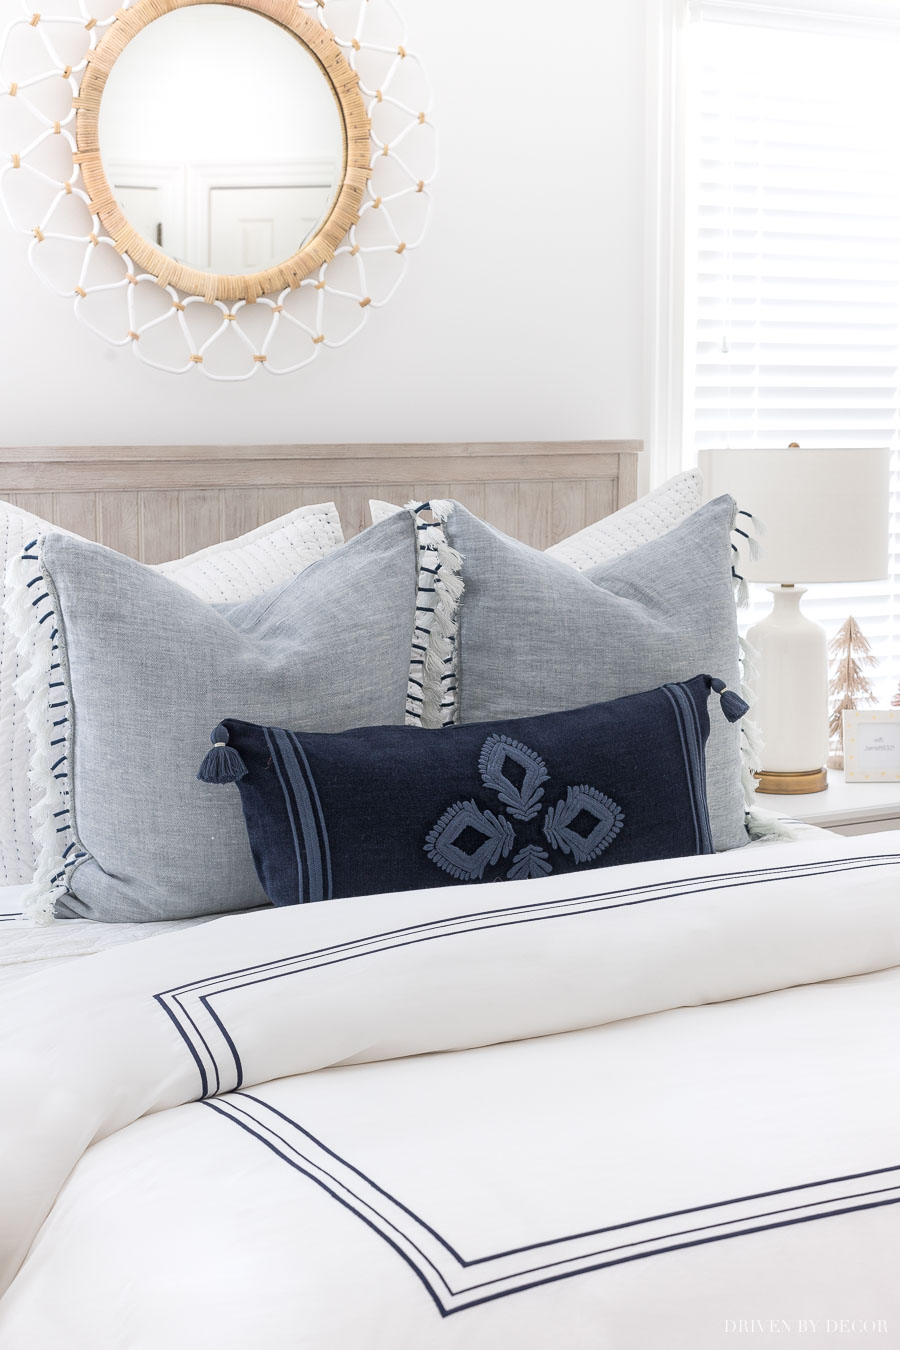 Loving these gorgeous blue and white pillows!